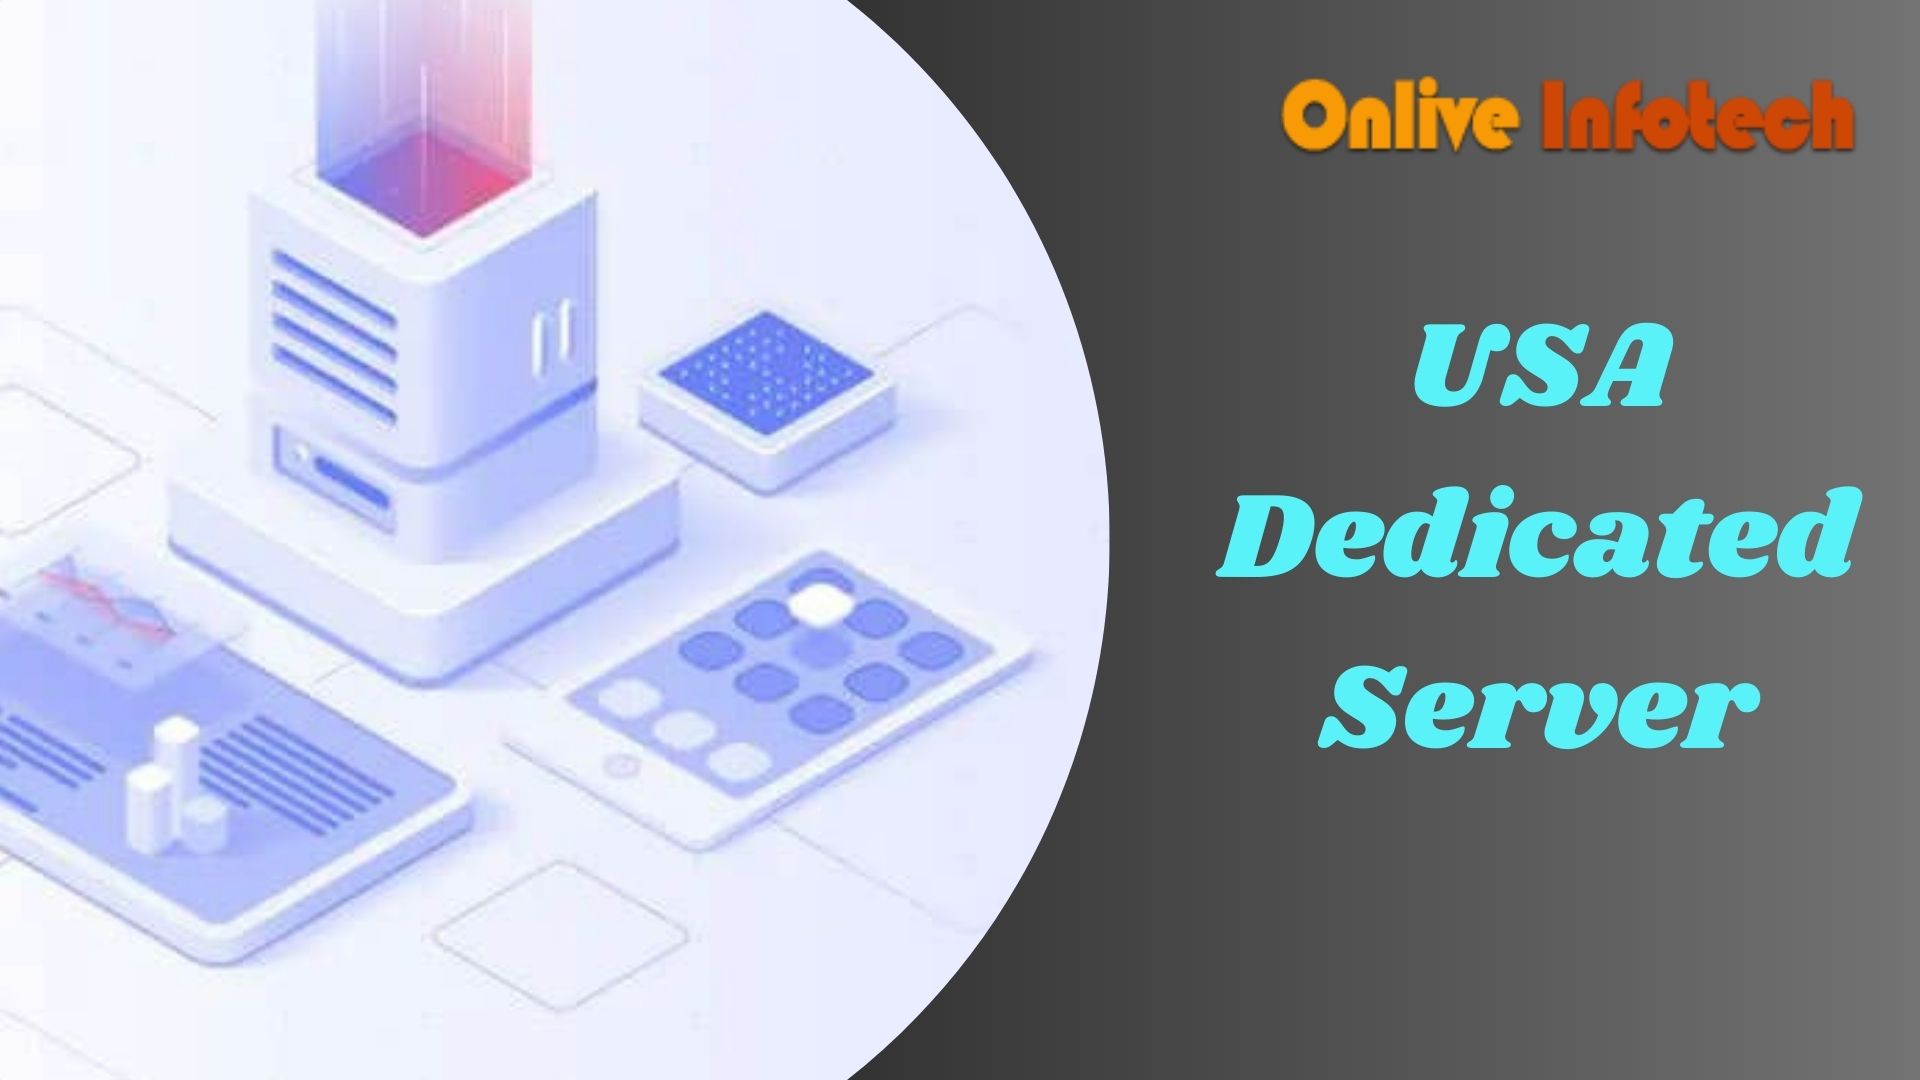 Outstanding USA Dedicated Server Supported Event in place Powered by Onlive Infotech, Ghaziabad, Uttar Pradesh, India